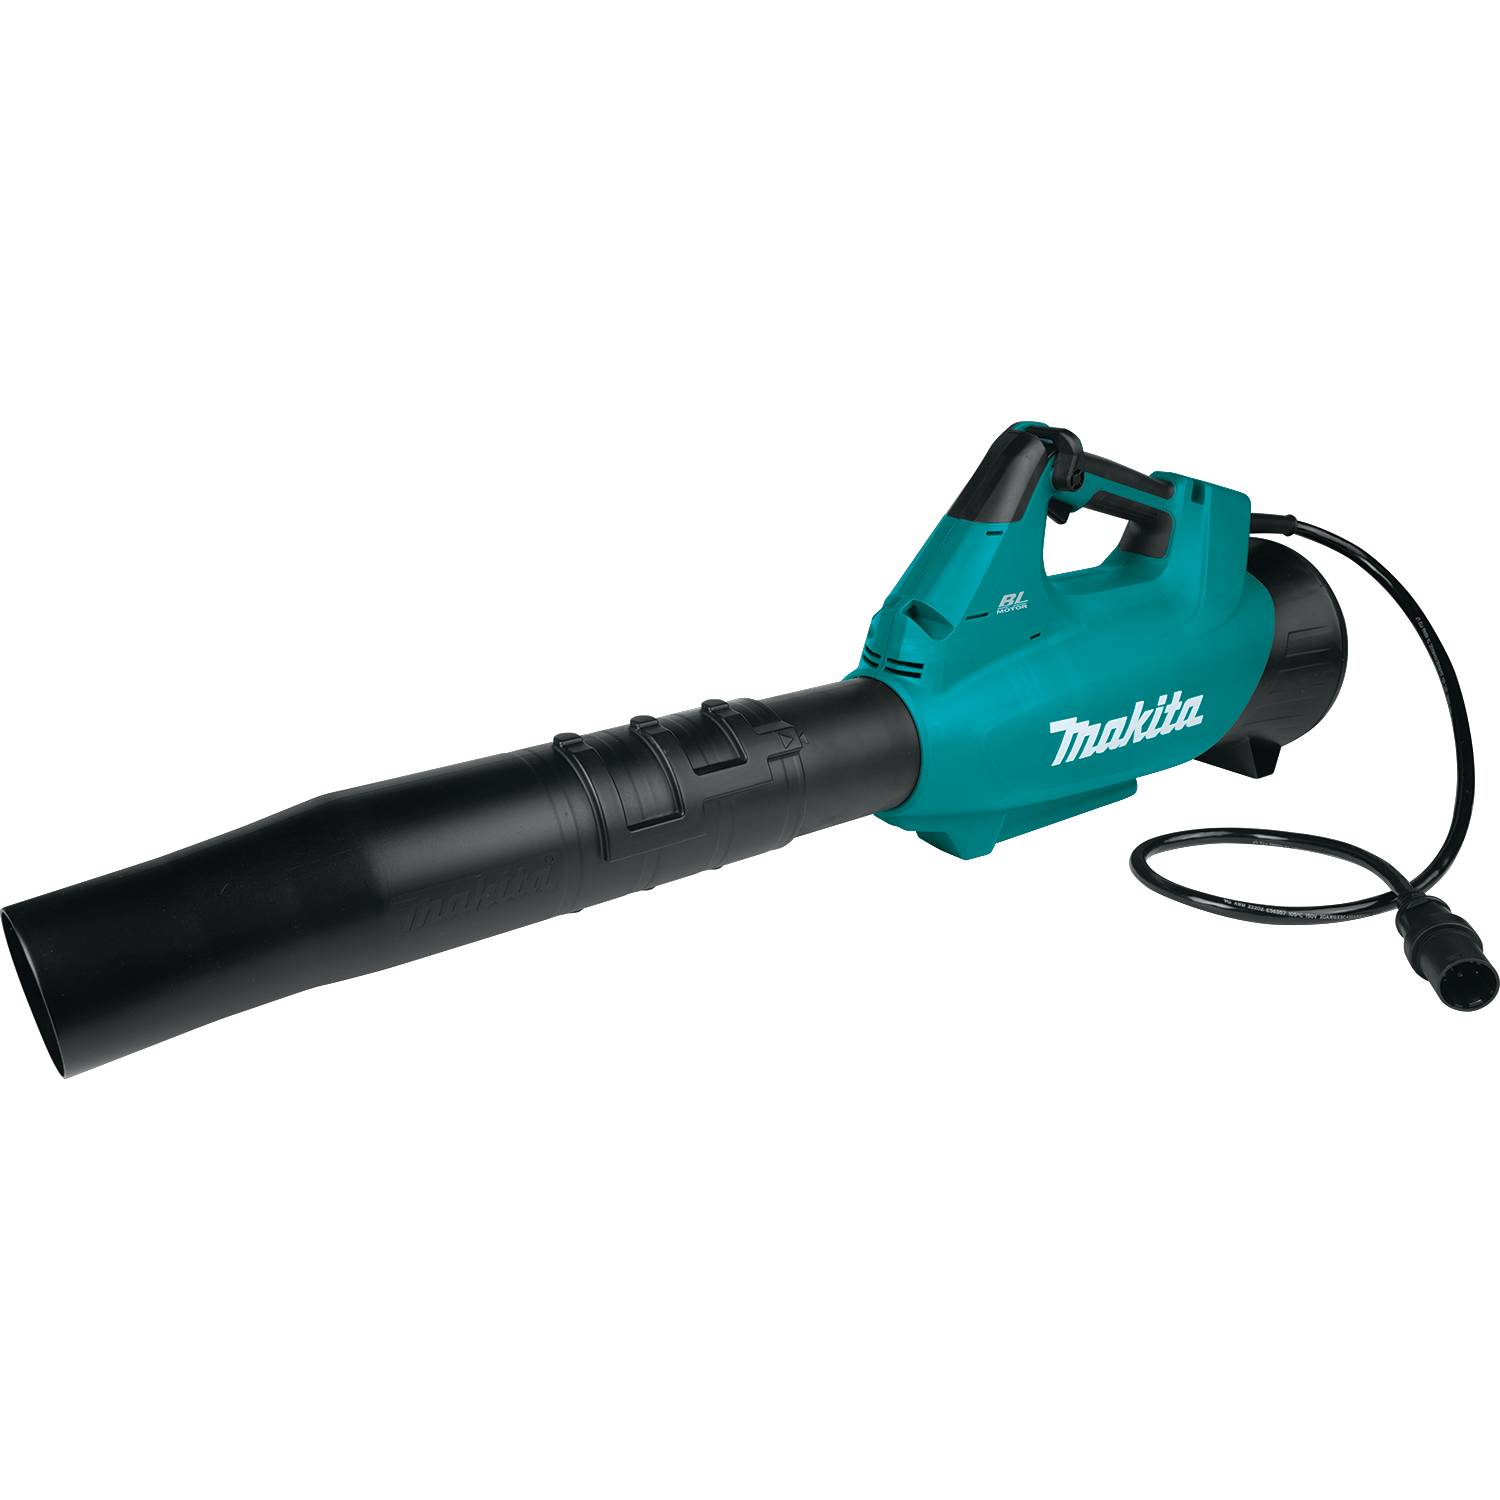 Double Battery Lawn Leaf Blower Vacuum Cleaner with Bag 36V